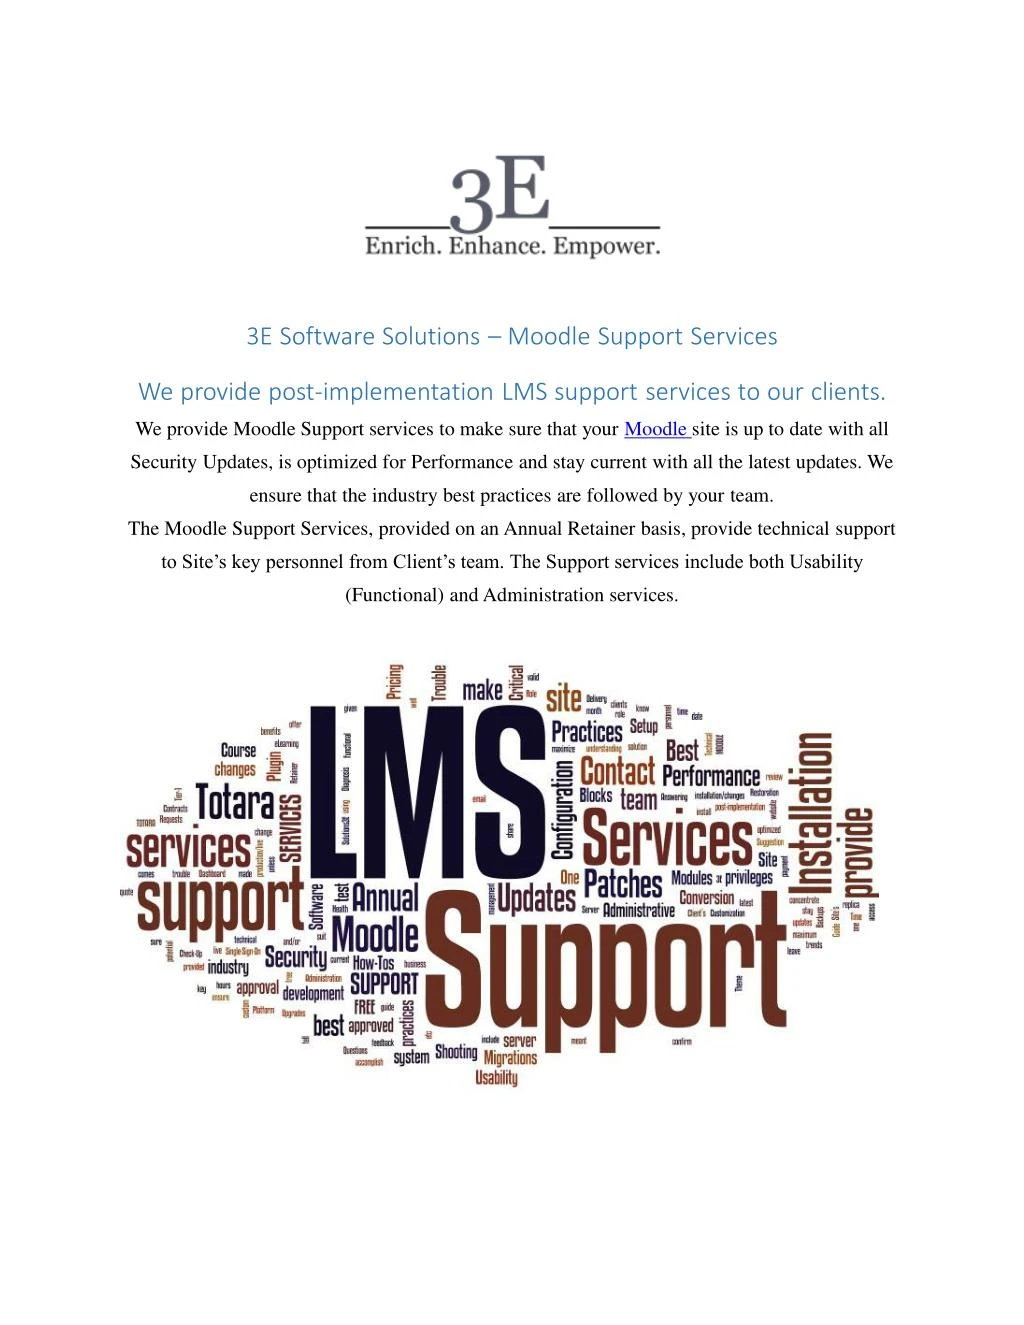 3e software solutions moodle support services